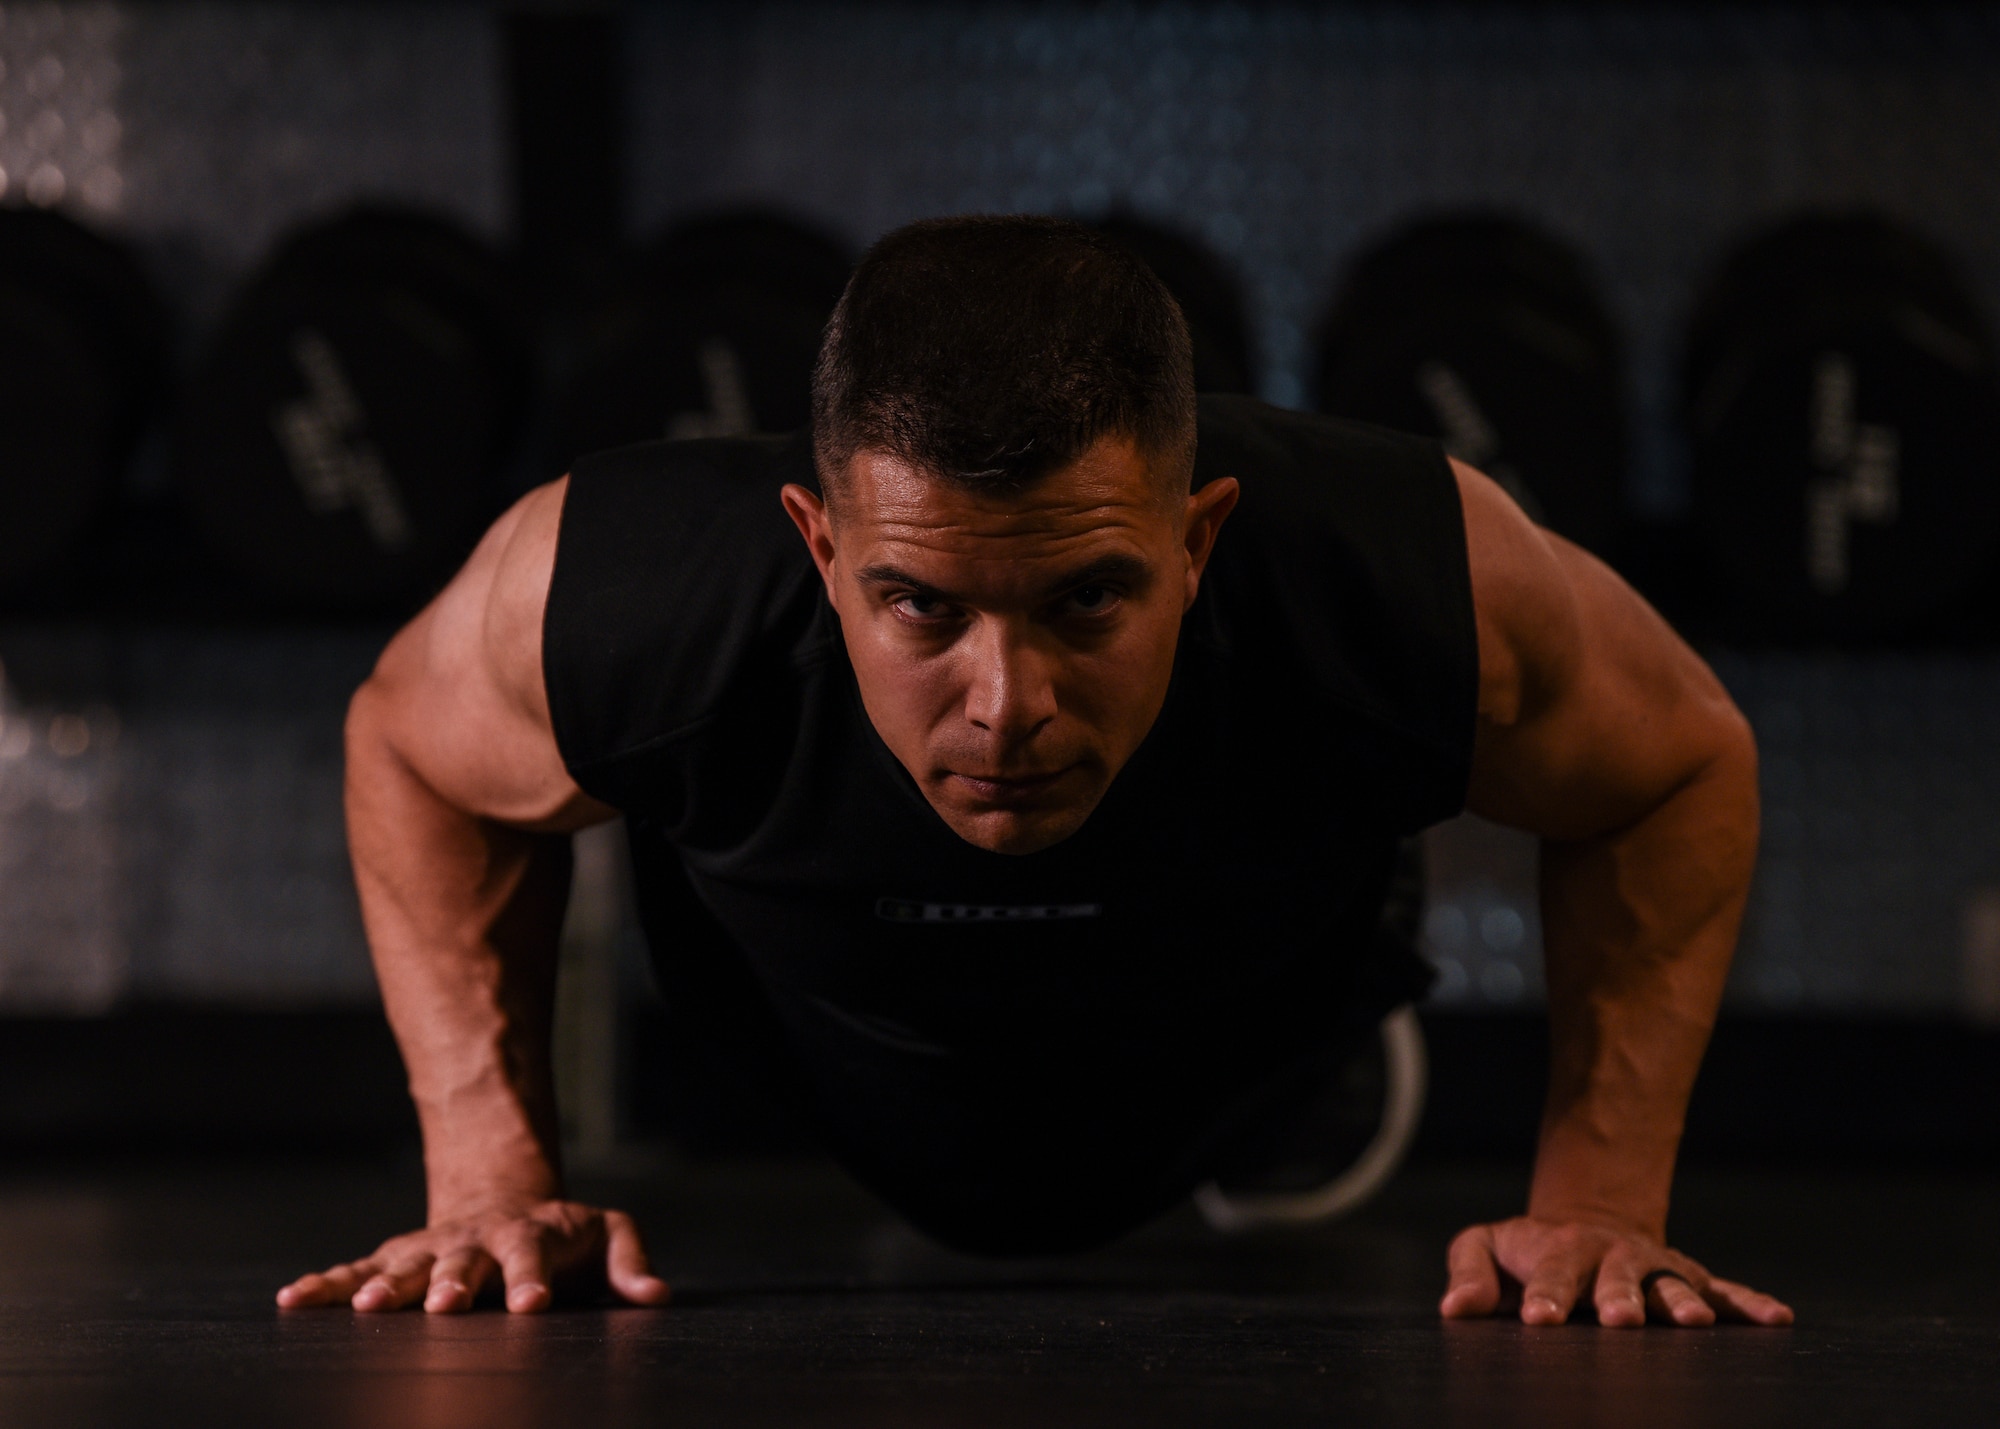 Major Richard Bottinelli, 90th Force Support Squadron operations officer, does a push-up at the Freedom Hall Fitness Center on F.E. Warren Air Force Base, Wyo., Aug. 1, 2019. He signed-up to compete in the men’s physique category in the Orlando, Fla., bodybuilding competition, a relatively new competing category, established in 2016. (U.S. Air Force photo by Staff Sgt. Ashley N. Sokolov)